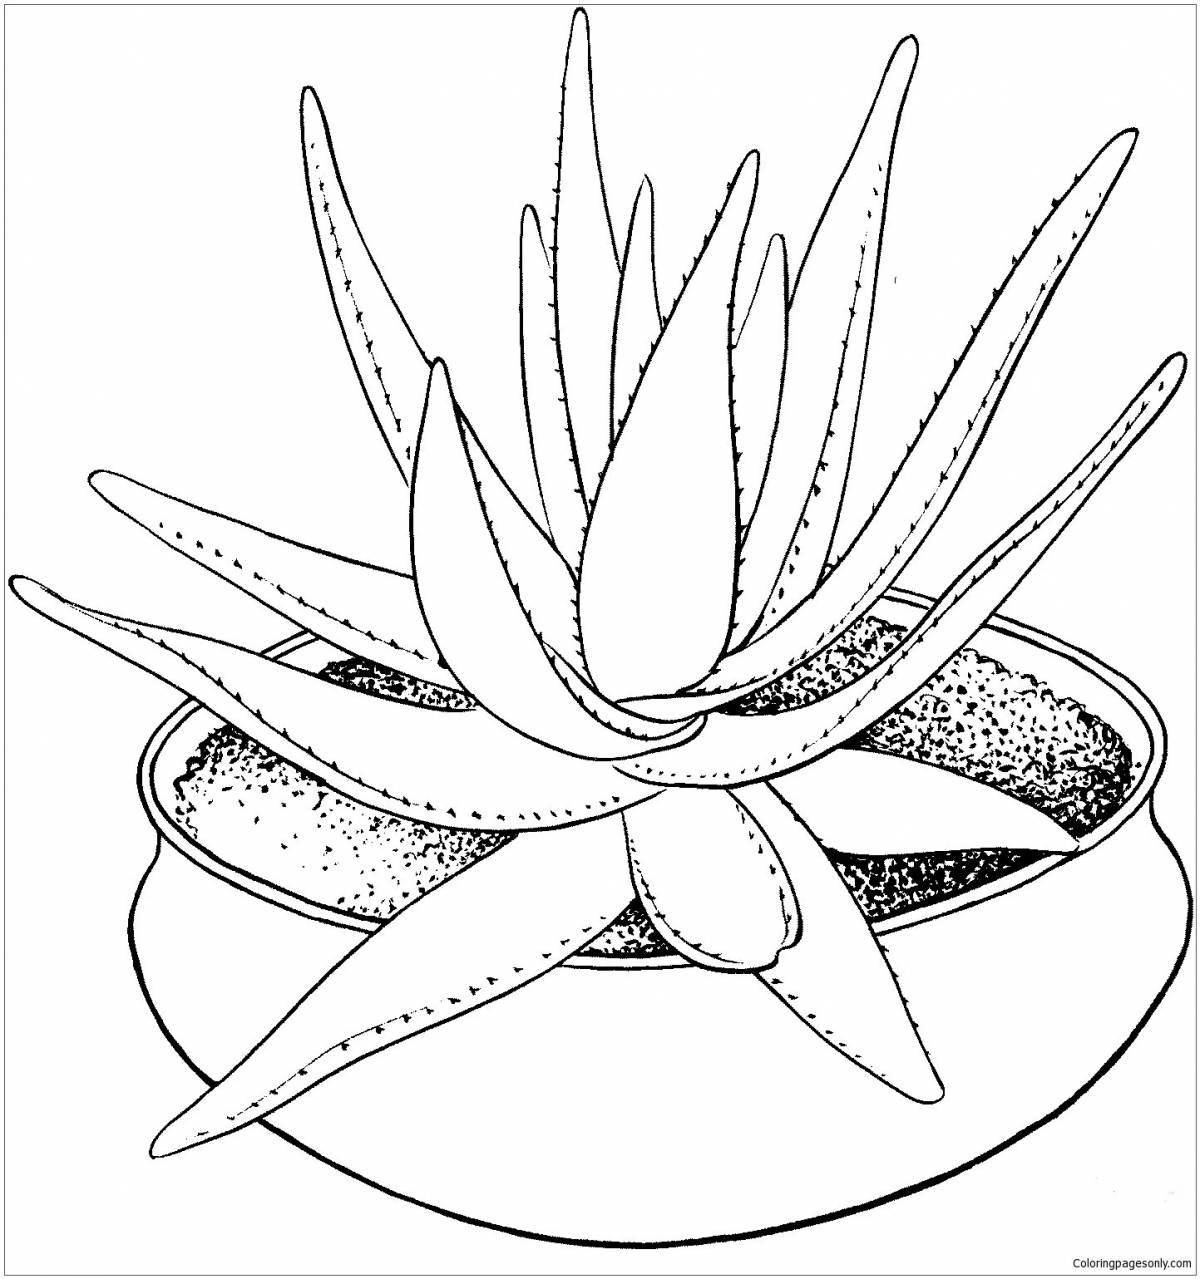 Cute houseplants coloring book for kids